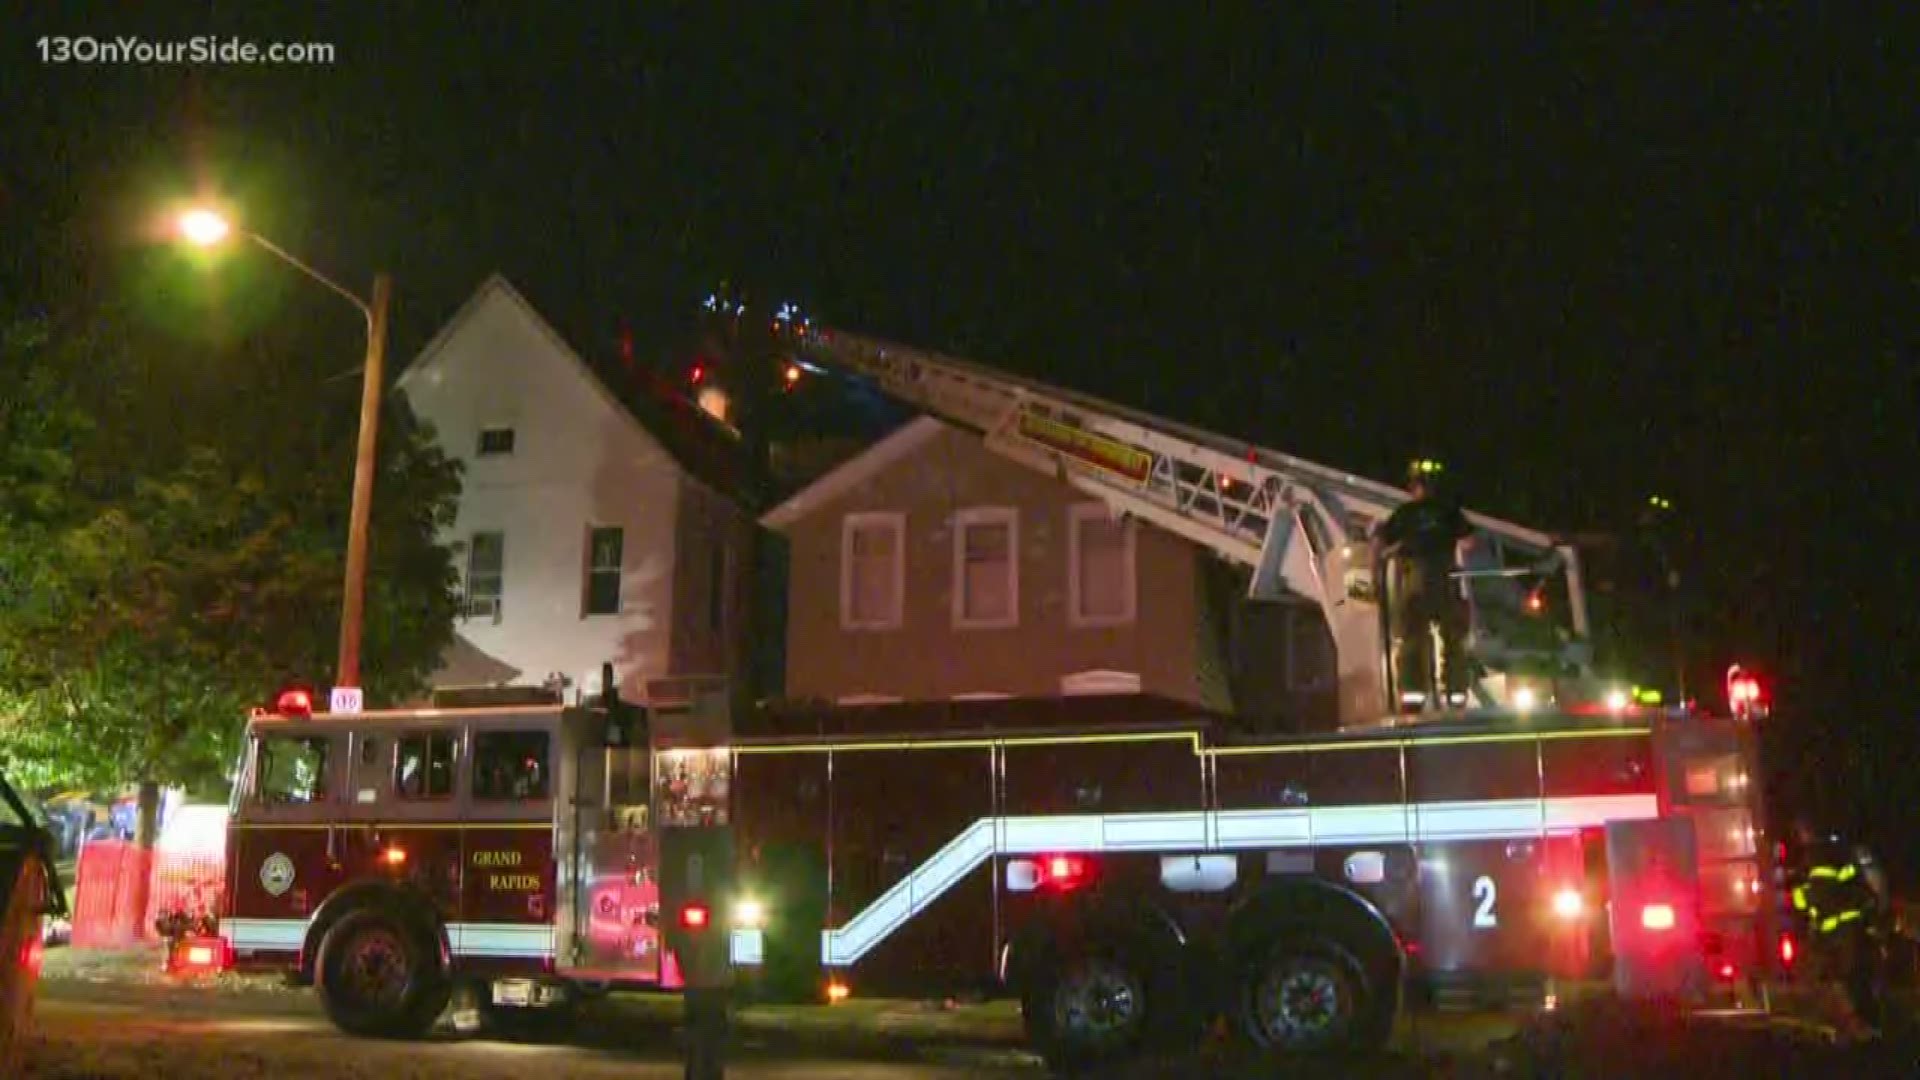 13 ON YOUR SIDE's Angela Cunningham was live at the scene of an overnight house fire that took place on the northeast side of Grand Rapids. She spoke with a Grand Rapids Fire Chief to learn more.